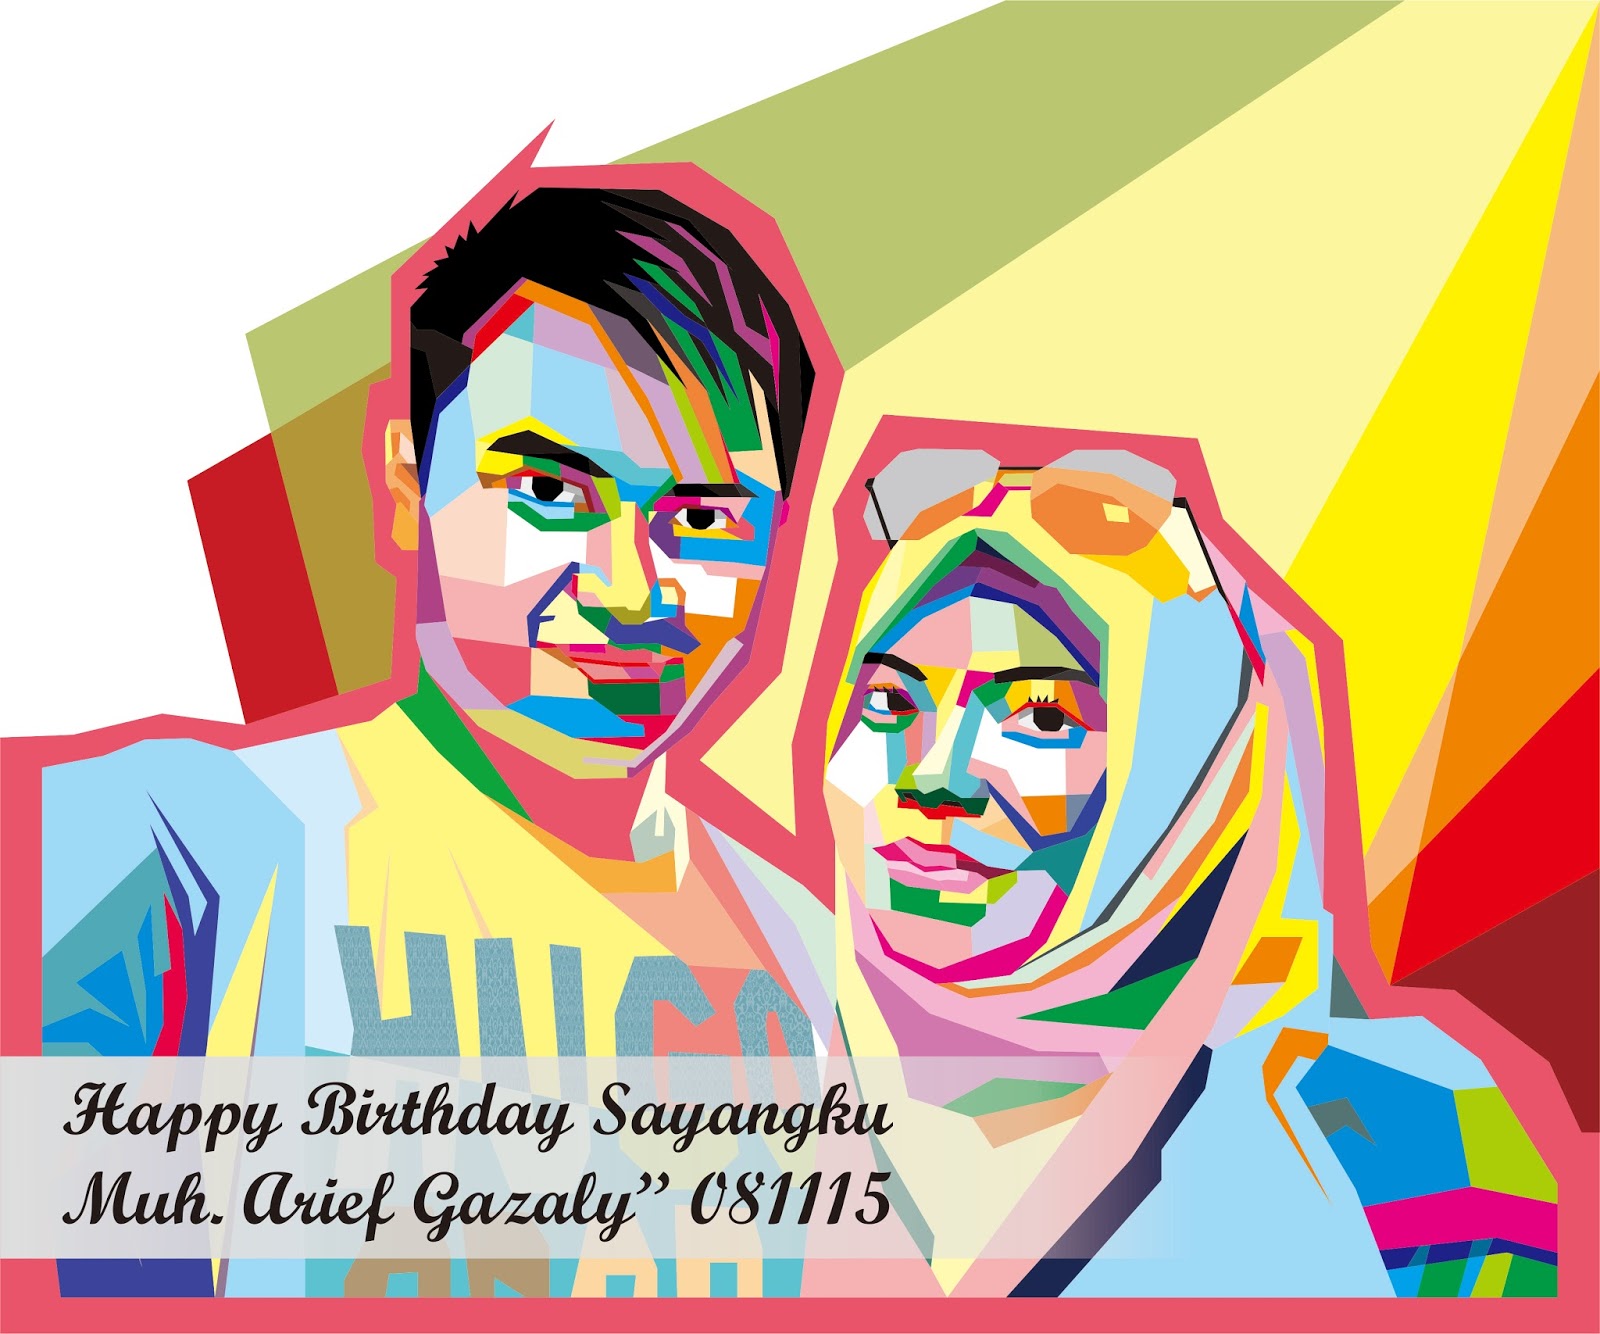 WPAP COUPLE for your partner